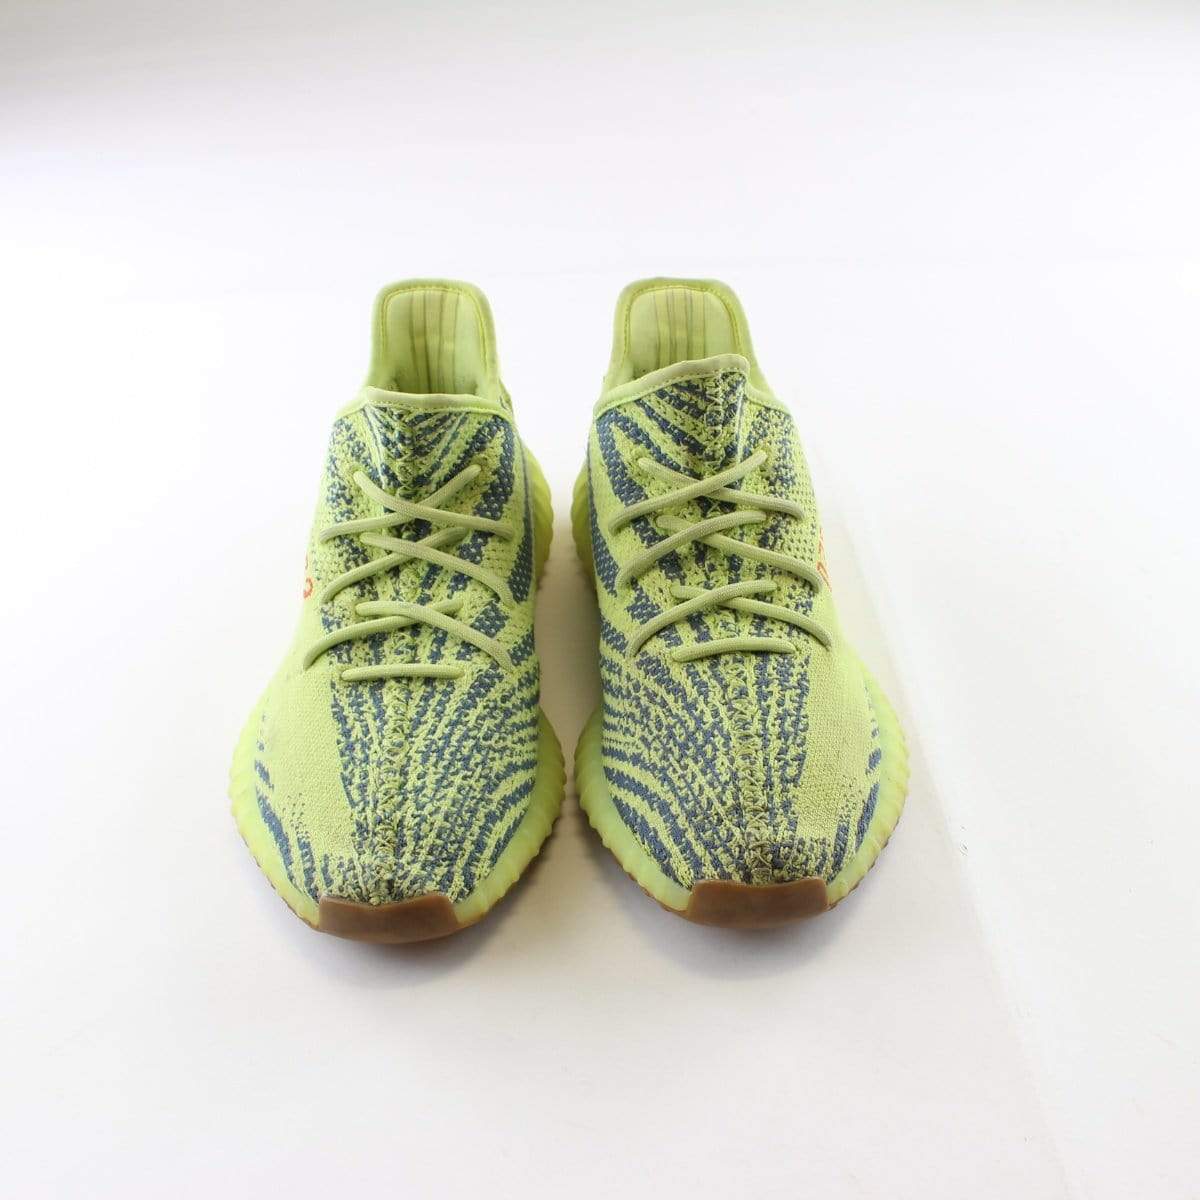 adidas Yeezy Boost 350 V2 Semi Frozen Yellow - SaruGeneral